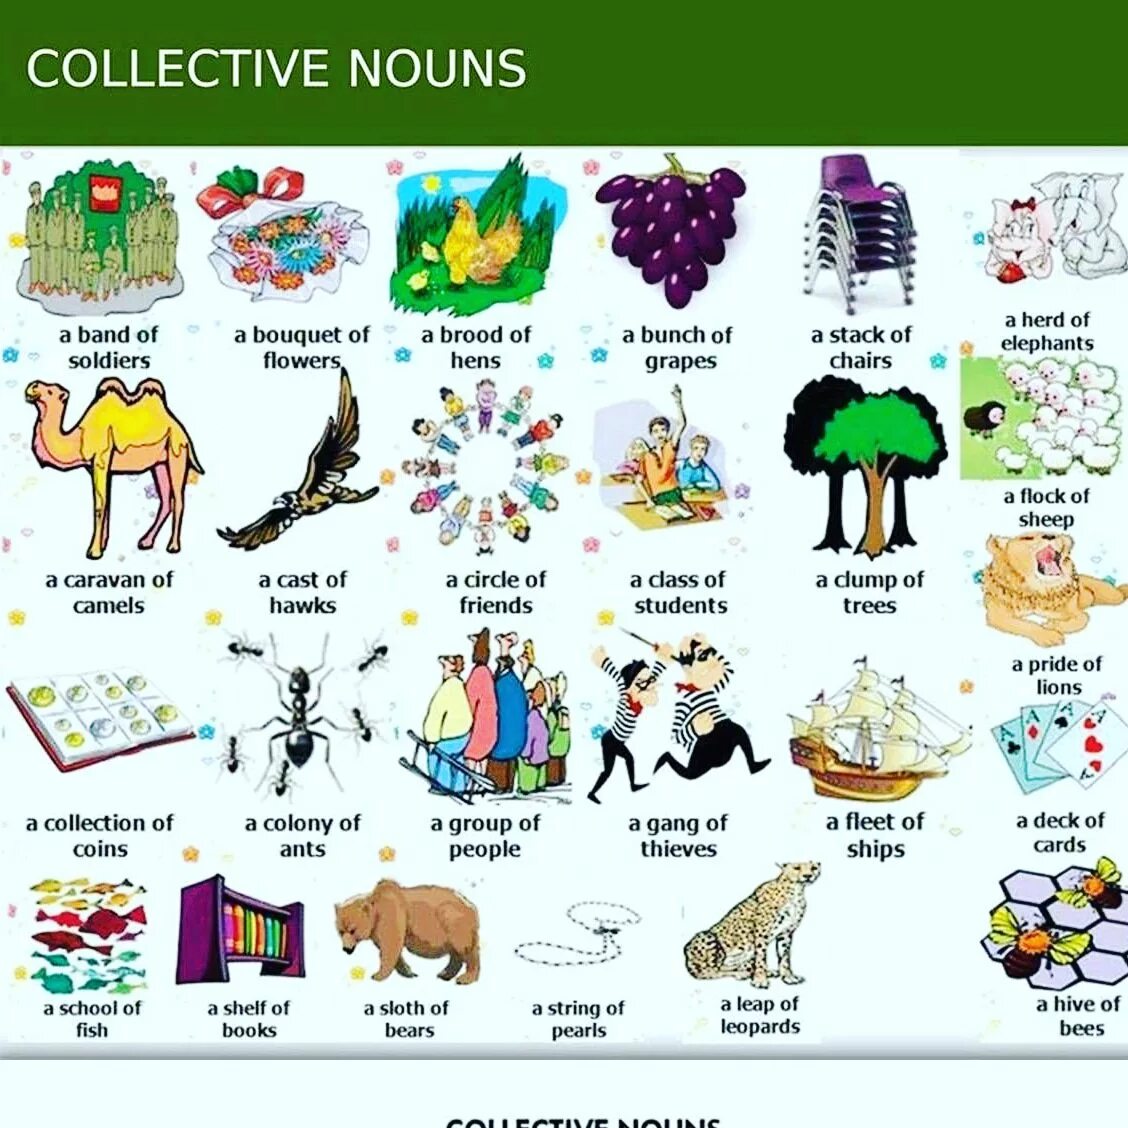 Collective Nouns in English. Collective Nouns for people. Collective Nouns exercises.